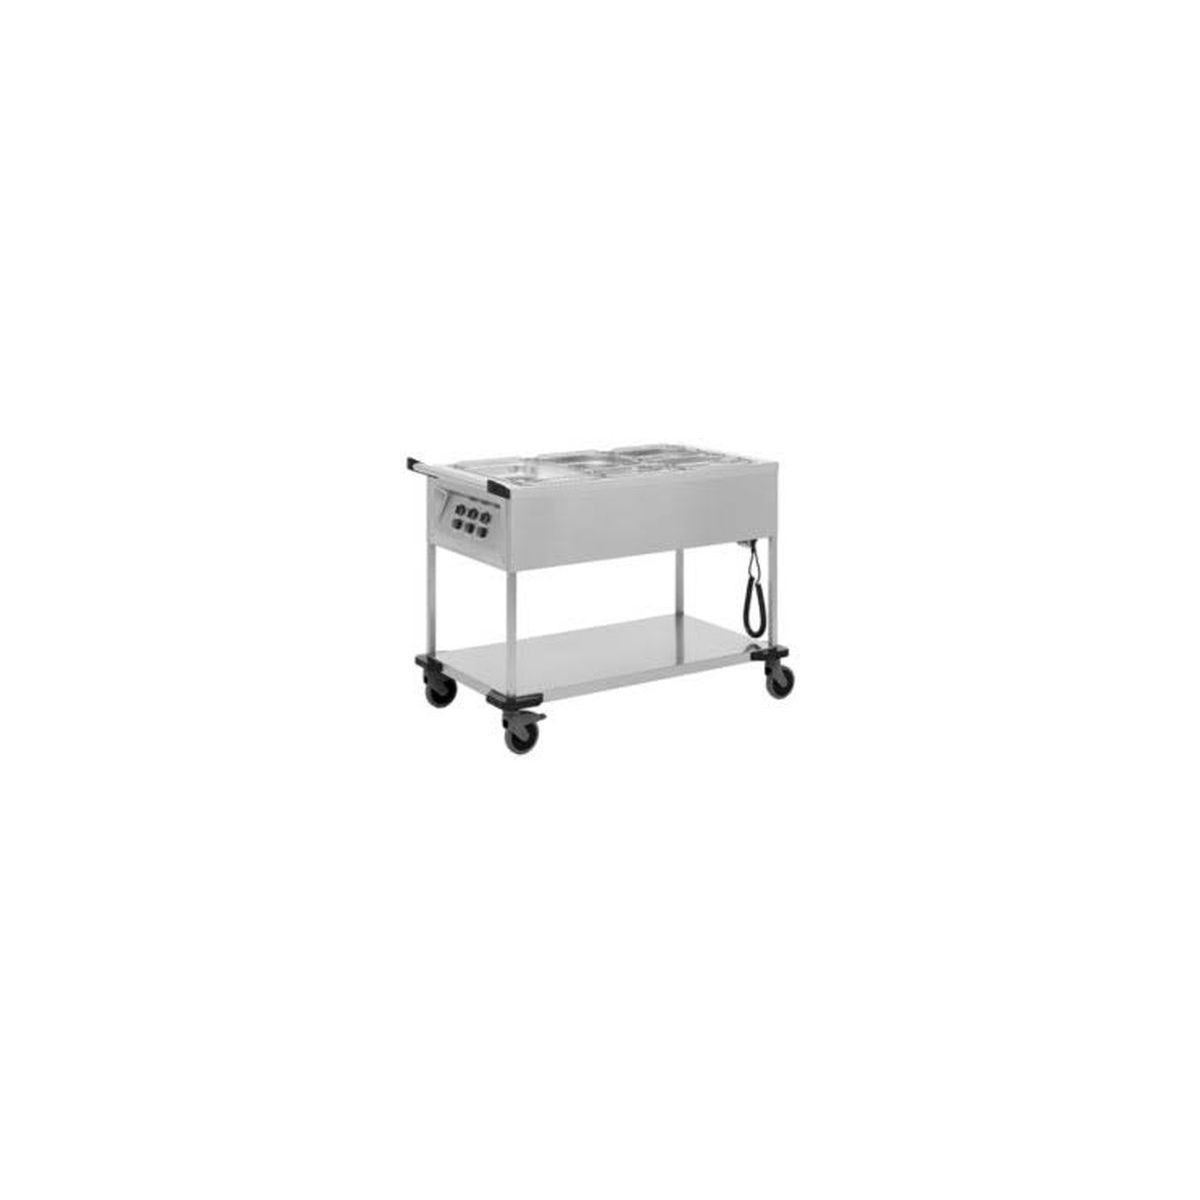 B.PRO CHARIOT BAIN-MARIE OUVERT SAW3